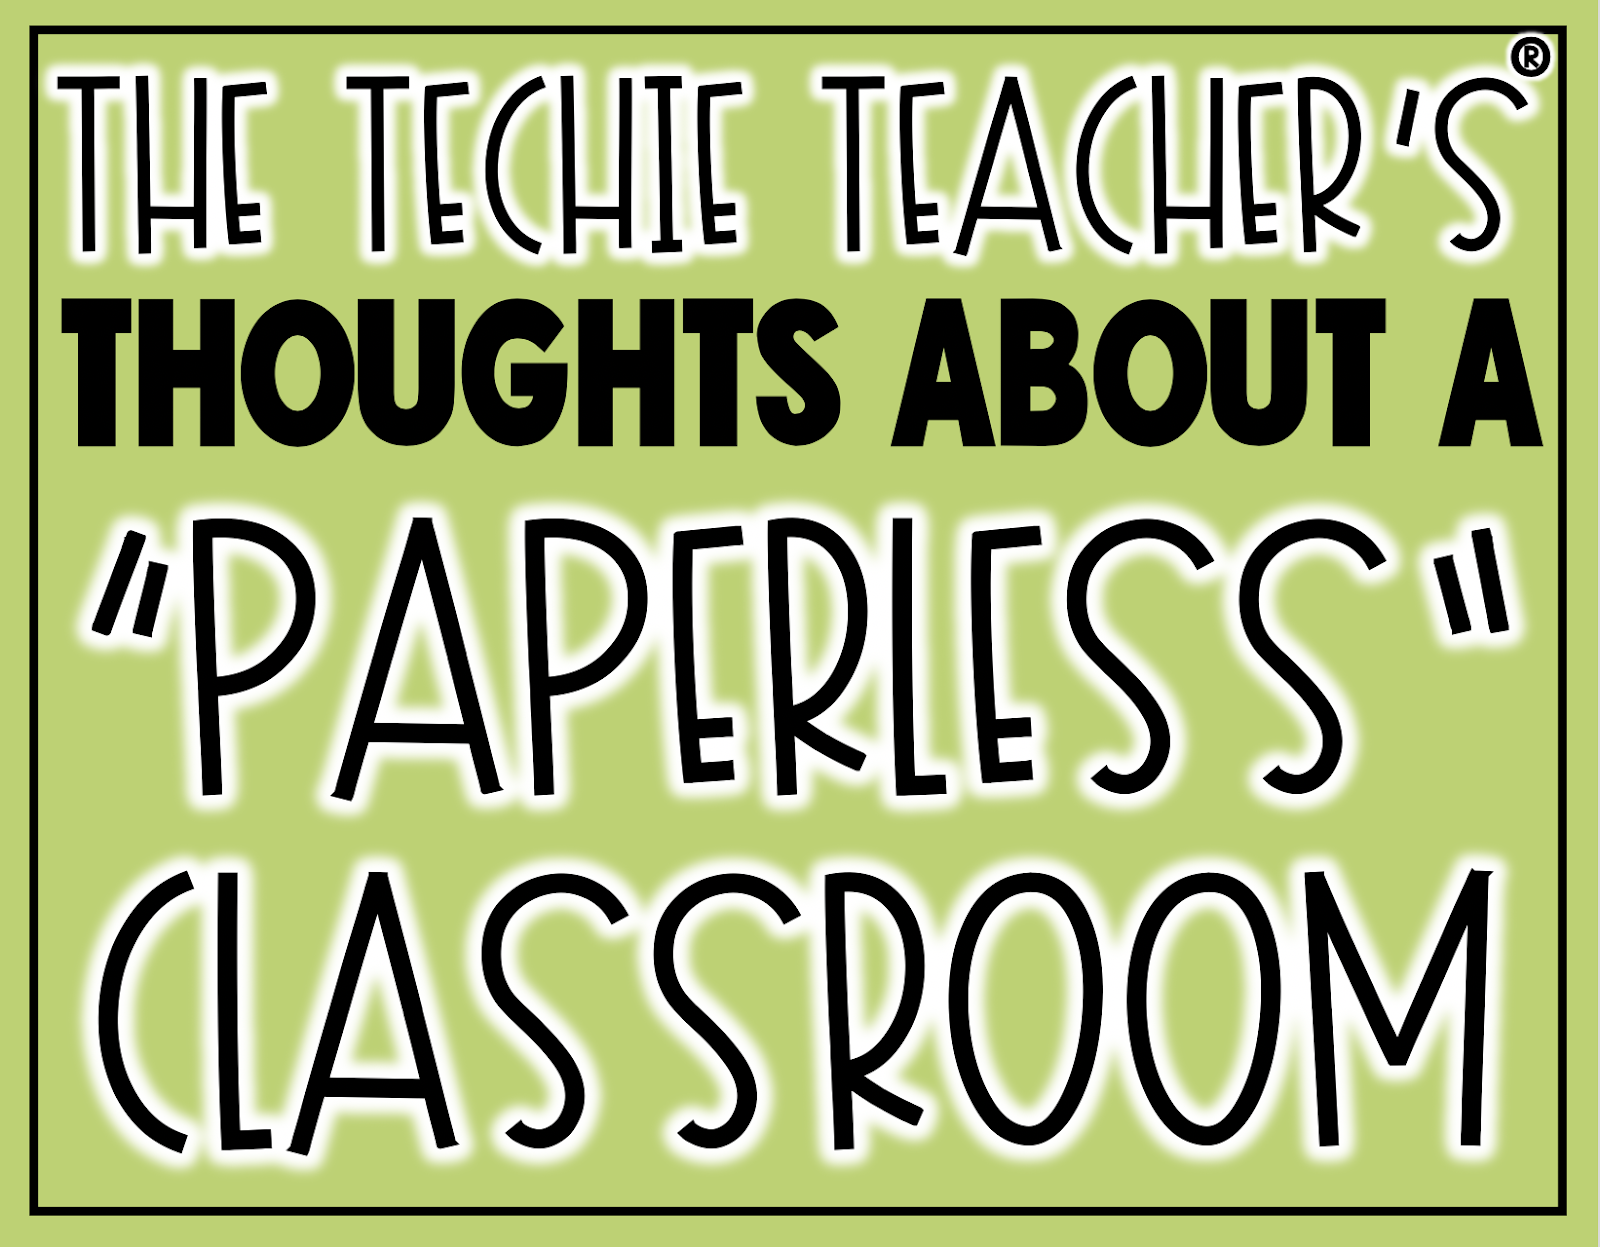 The Techie Teacher's® thoughts about a PAPERLESS classroom: is this an ideal learning environment?